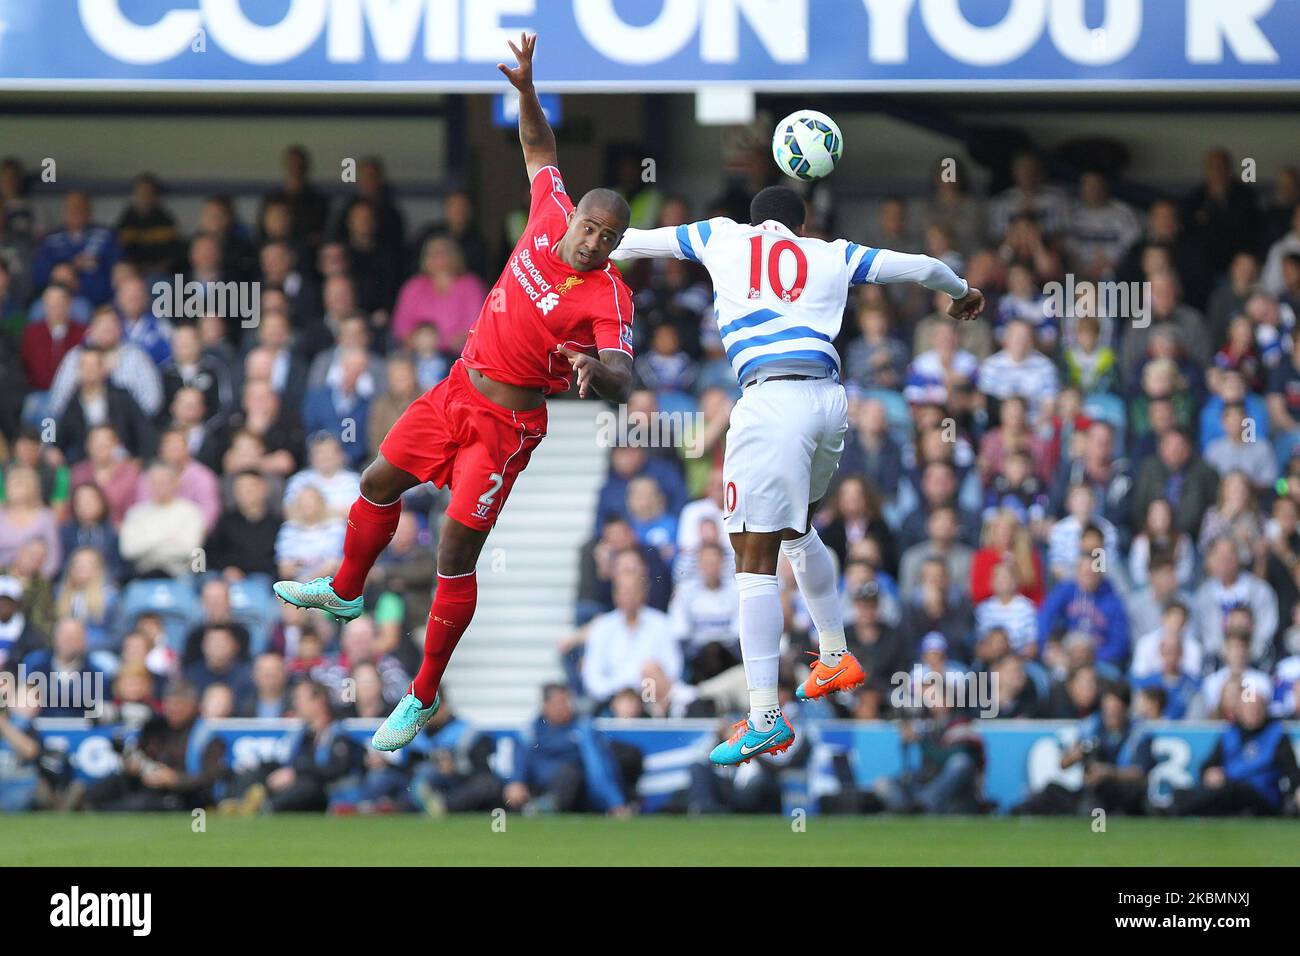 Liverpool Defender Glen Johnson jumps with Queens Park Rangers Midfielder Leroy Fer for a header in the first half during the Barclays Premier League Match between Queens Park Rangers & Liverpool at Loftus Road, London on Sunday October 19th 2014 (Photo by MI News/NurPhoto) Stock Photo